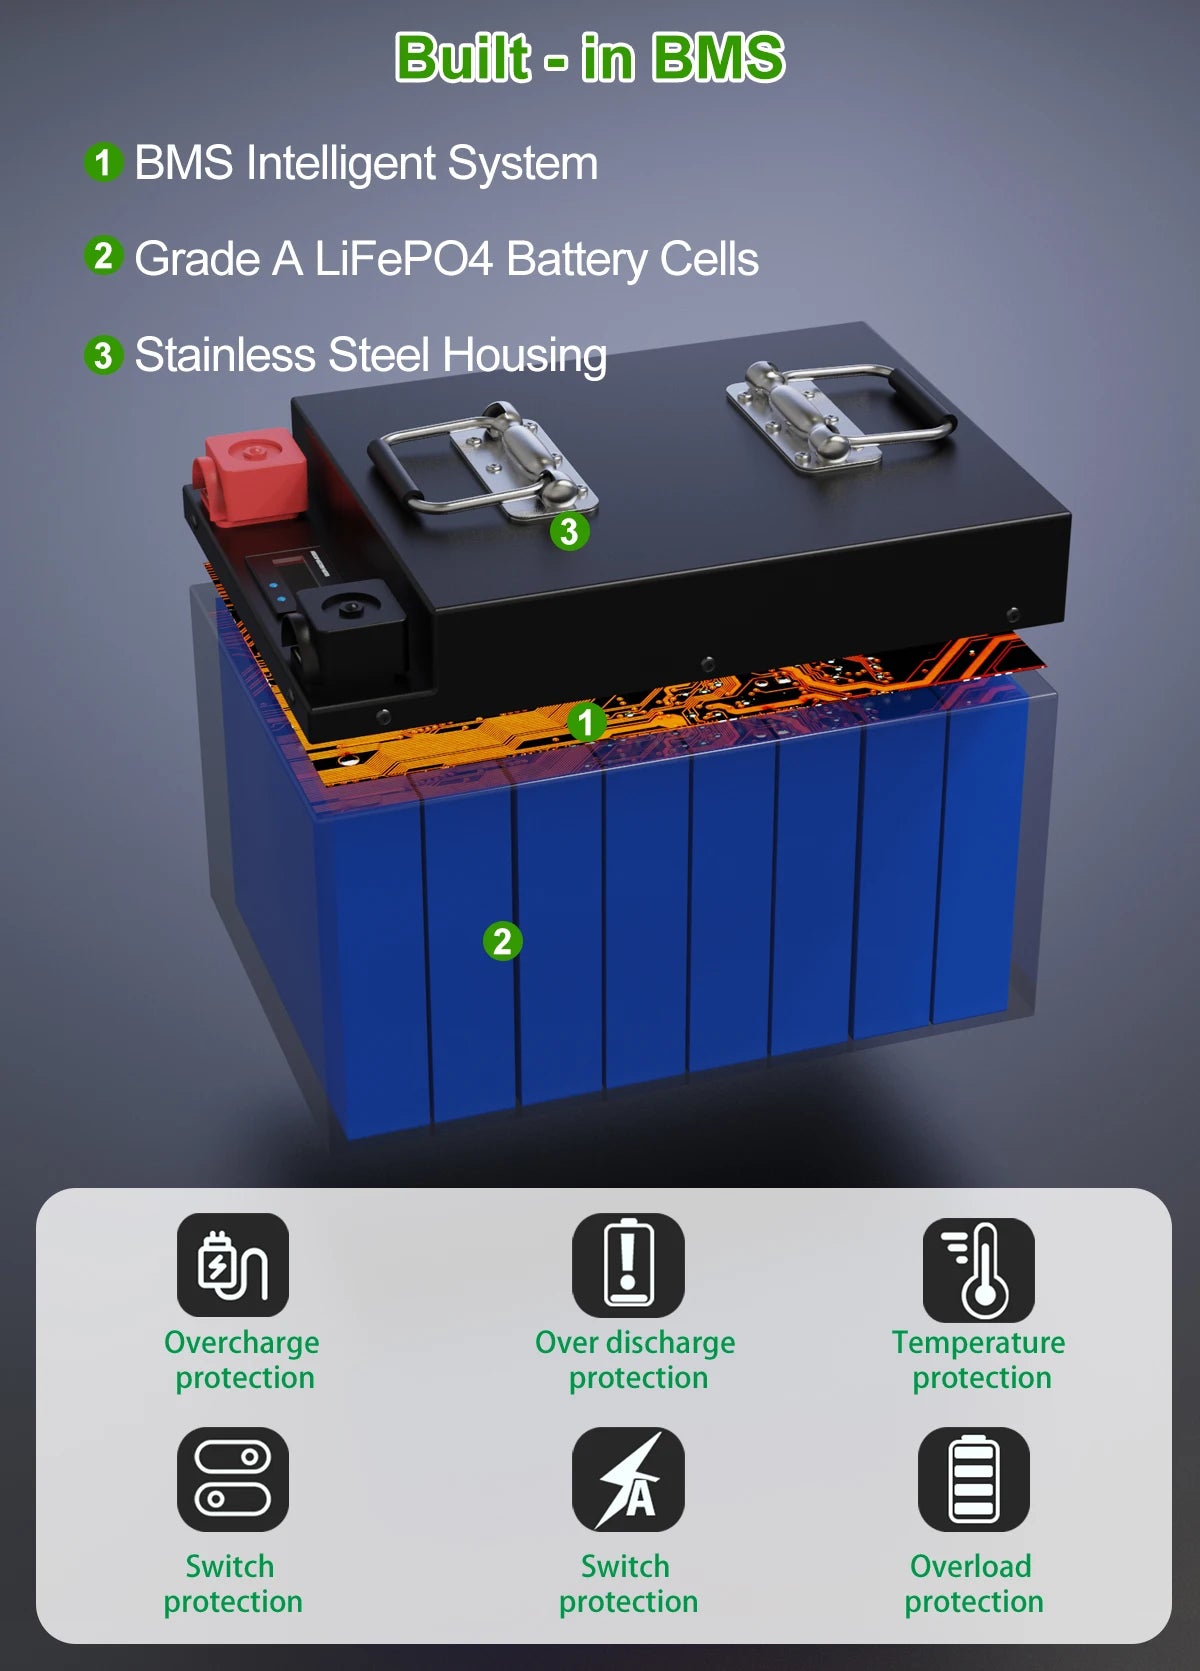 24V 240Ah 200Ah LiFePO4 Battery, Built-in battery management system with multiple protections for safe lithium-ion cell usage.